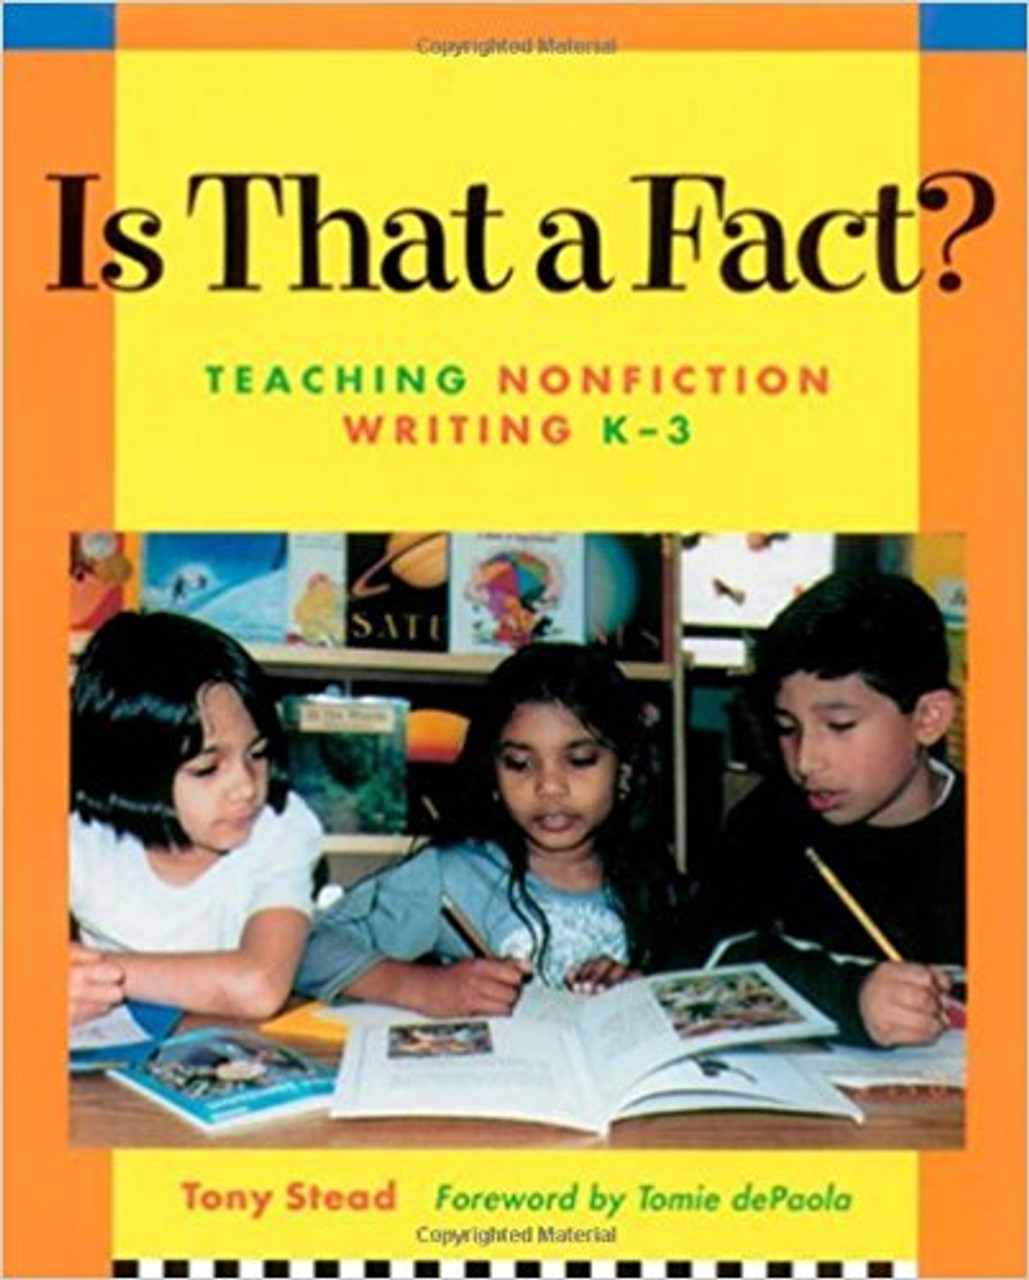 Is That a Fact?: Teaching Nonfiction Writing K-3 by Tony Stead